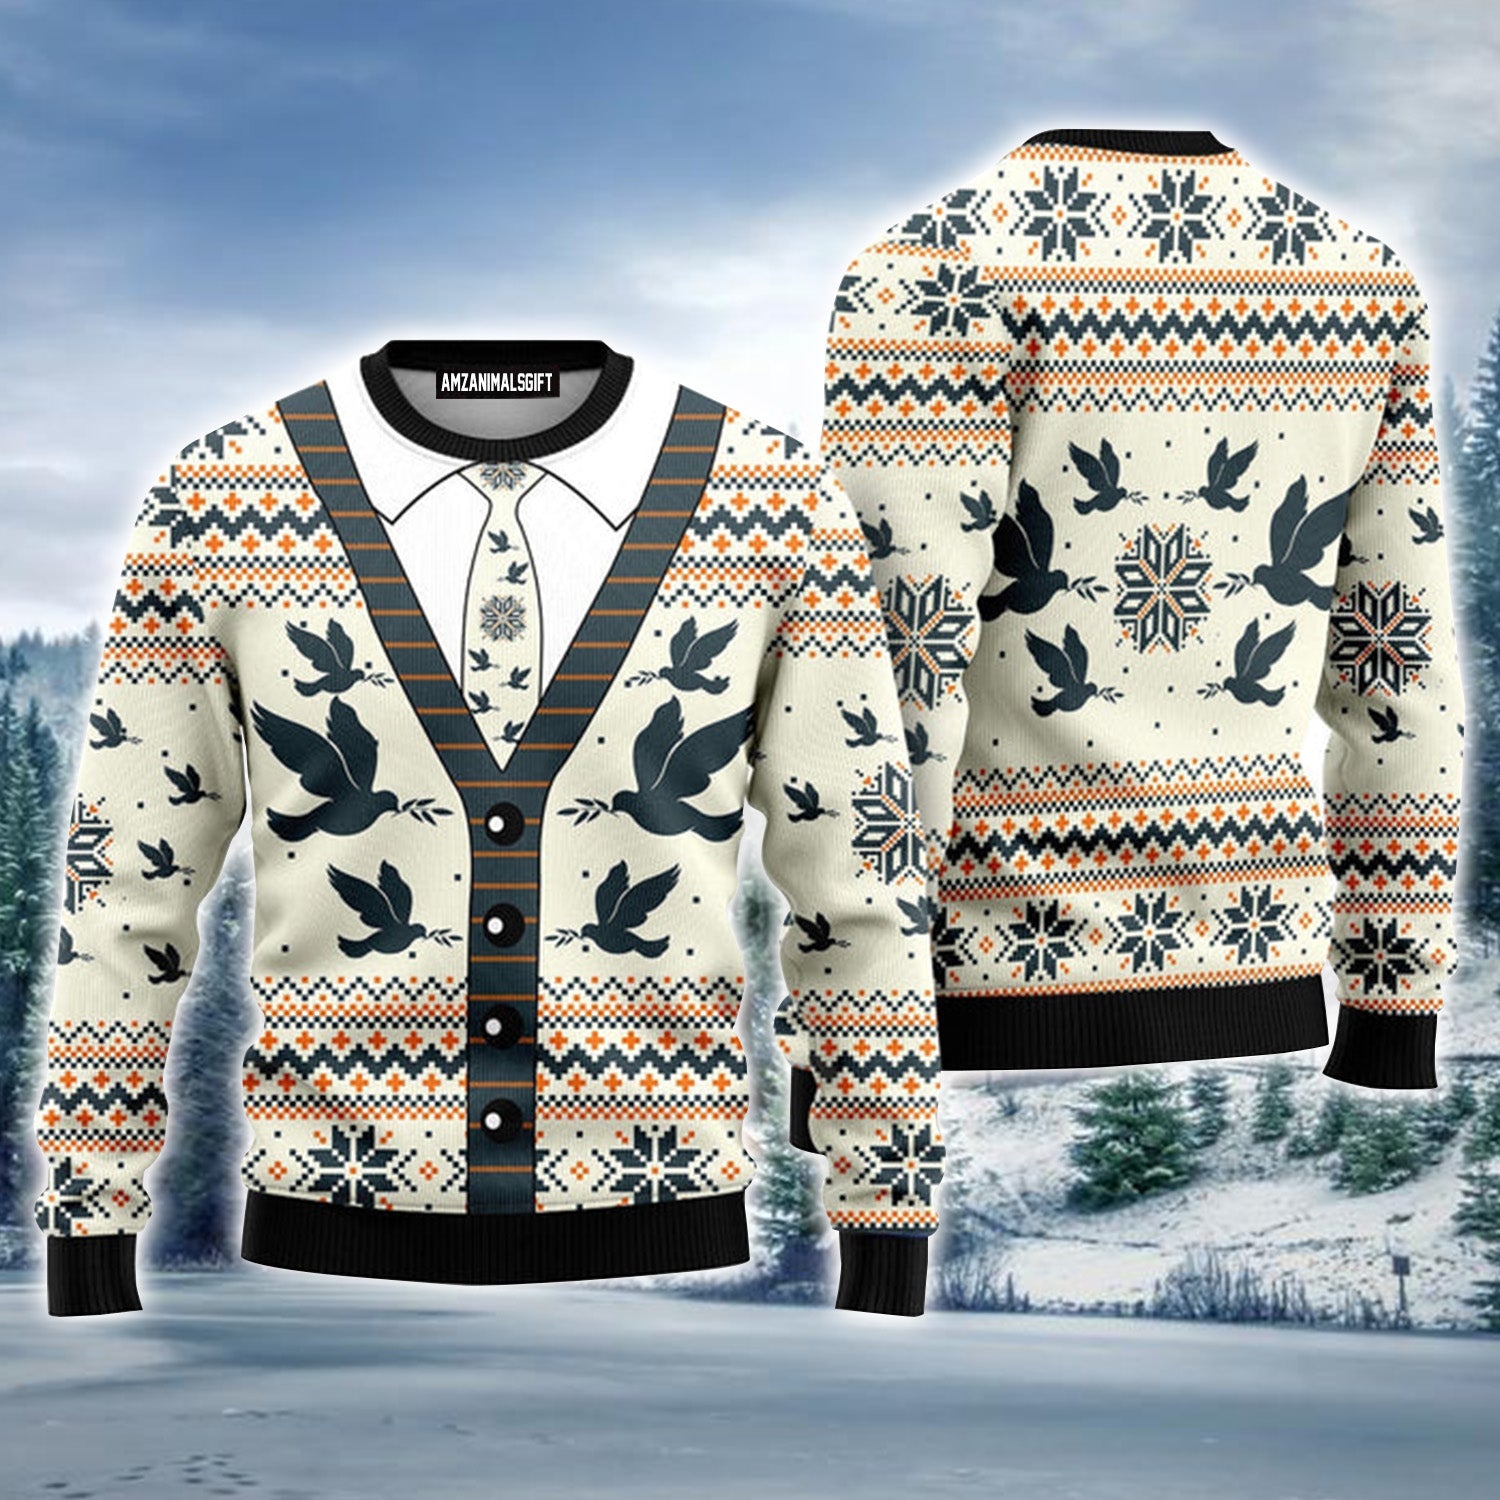 Pigeon Christmas Cardigan Urly Christmas Sweater, Christmas Sweater For Men & Women - Perfect Gift For Christmas, New Year, Winter Holiday